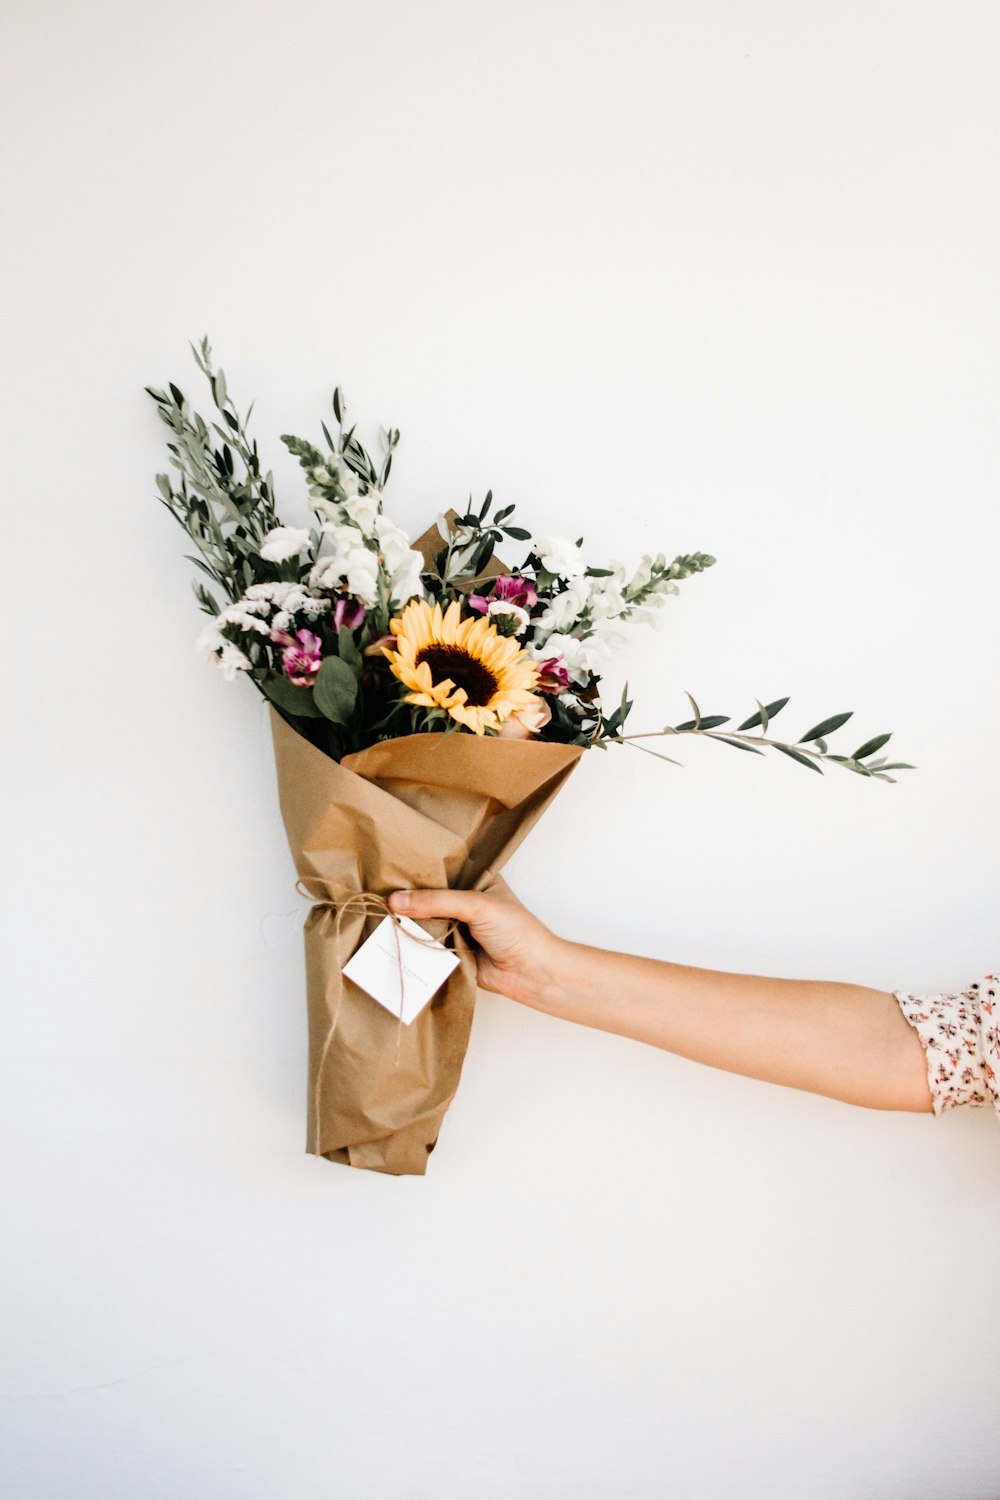 Bouquet Of Flowers Pictures | Download Free Images on Unsplash